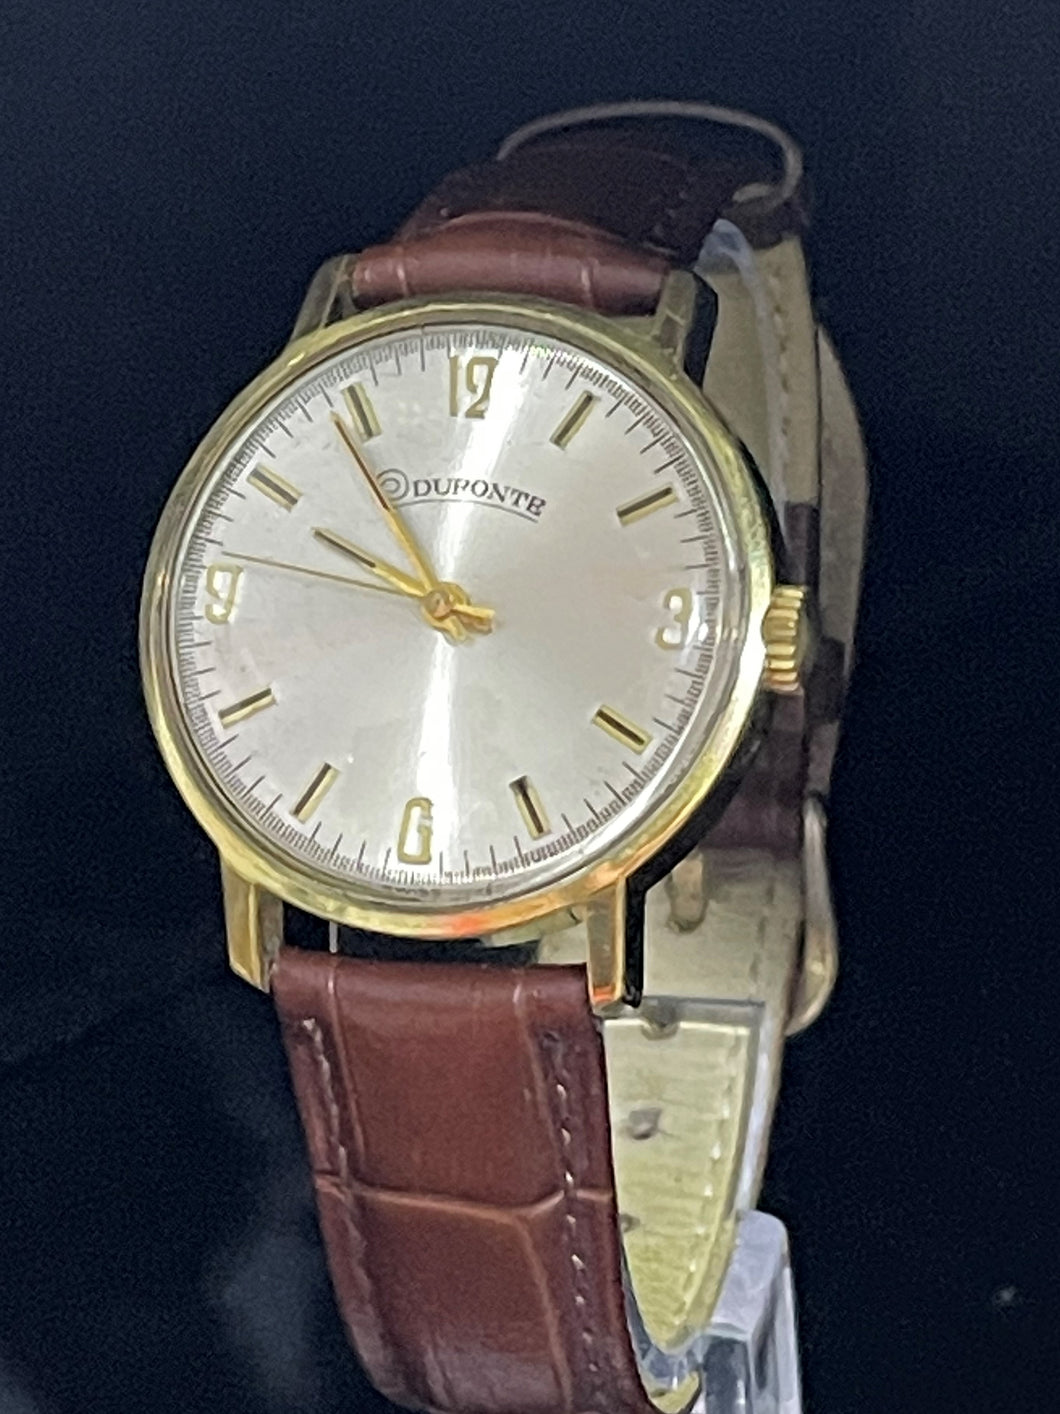 Preowned DuPonte Watch by Lucien Piccard Mechanical Watch